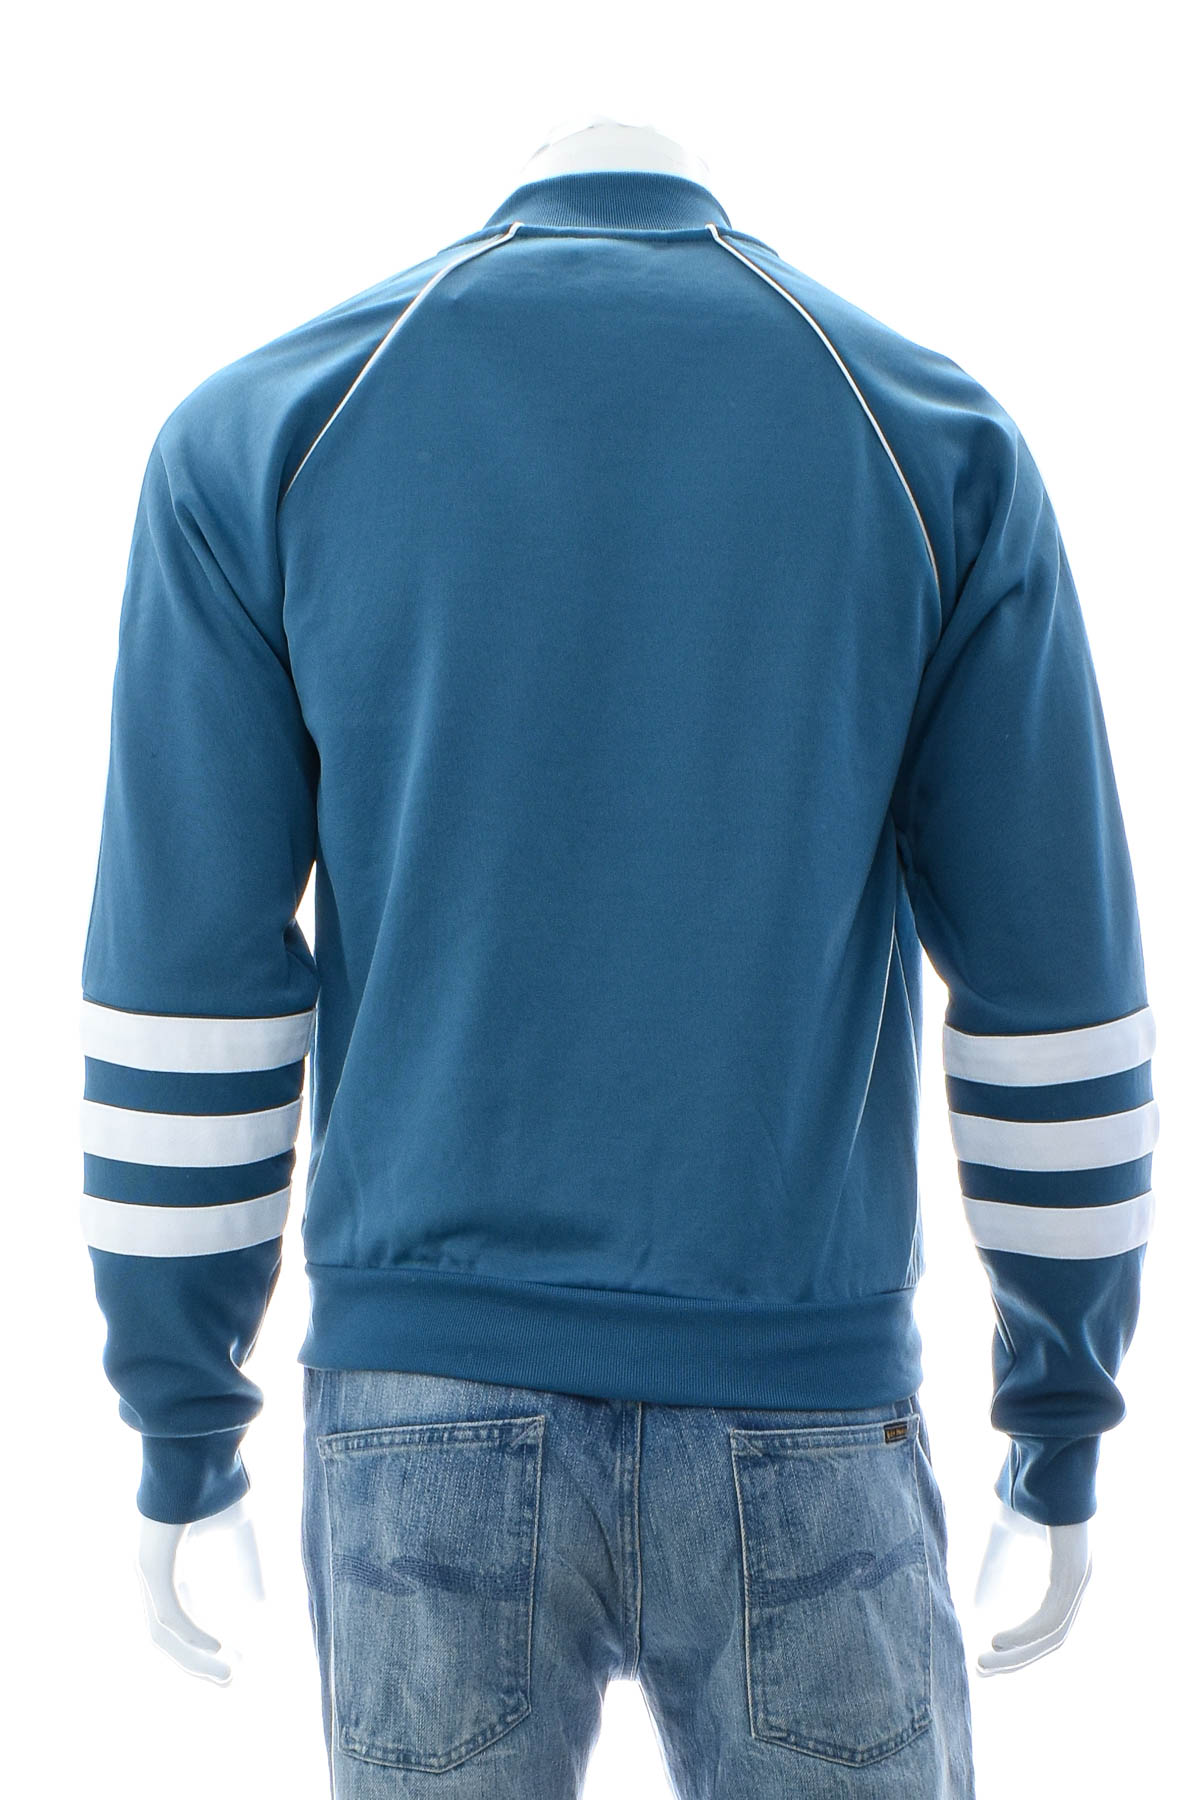 Male sports top - Adidas - 1